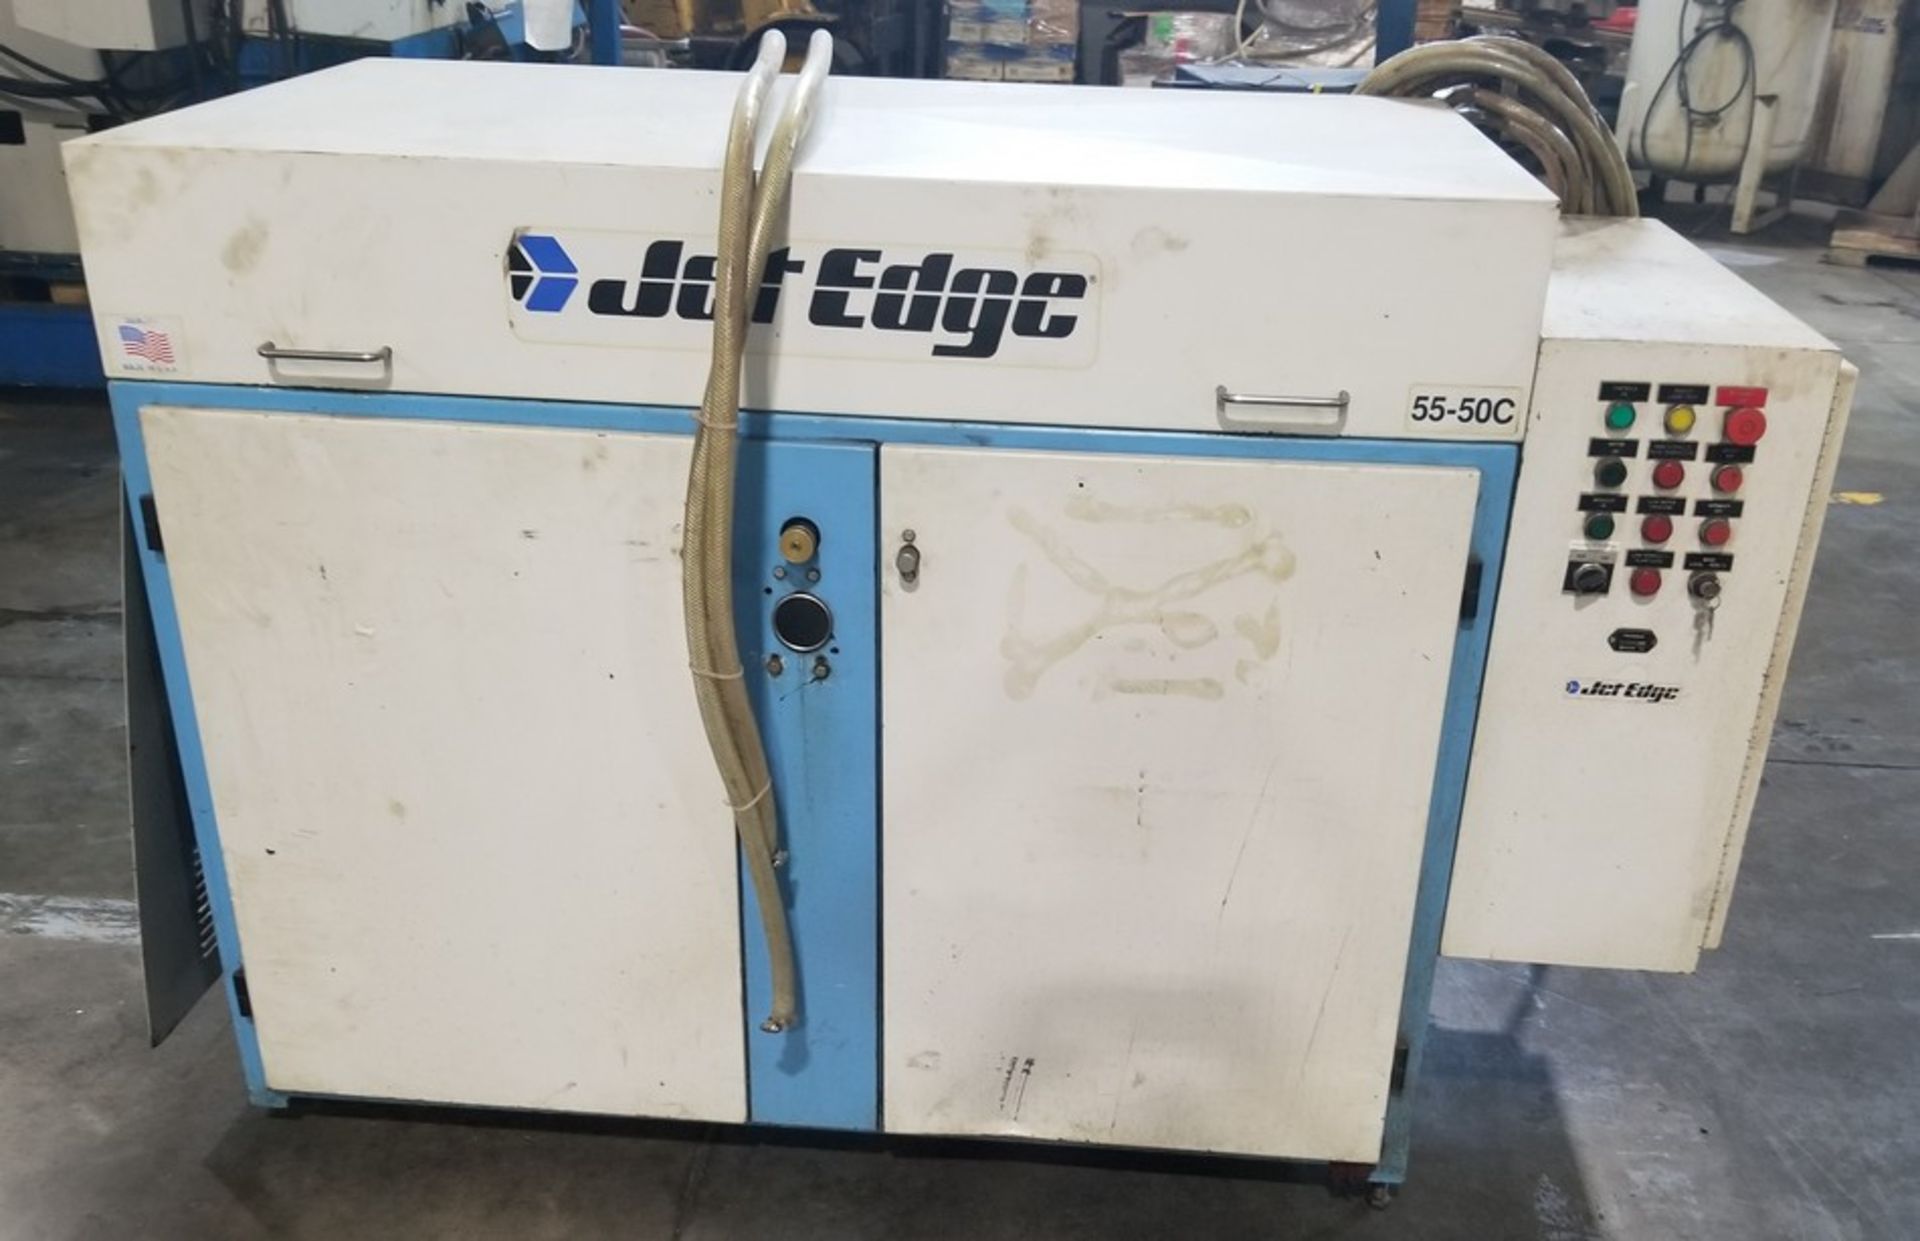 JETEDGE MODEL 4X8HR (612) WATER JET CUTTING SYSTEM, S/N 17046, NEW 2004 - Image 12 of 12